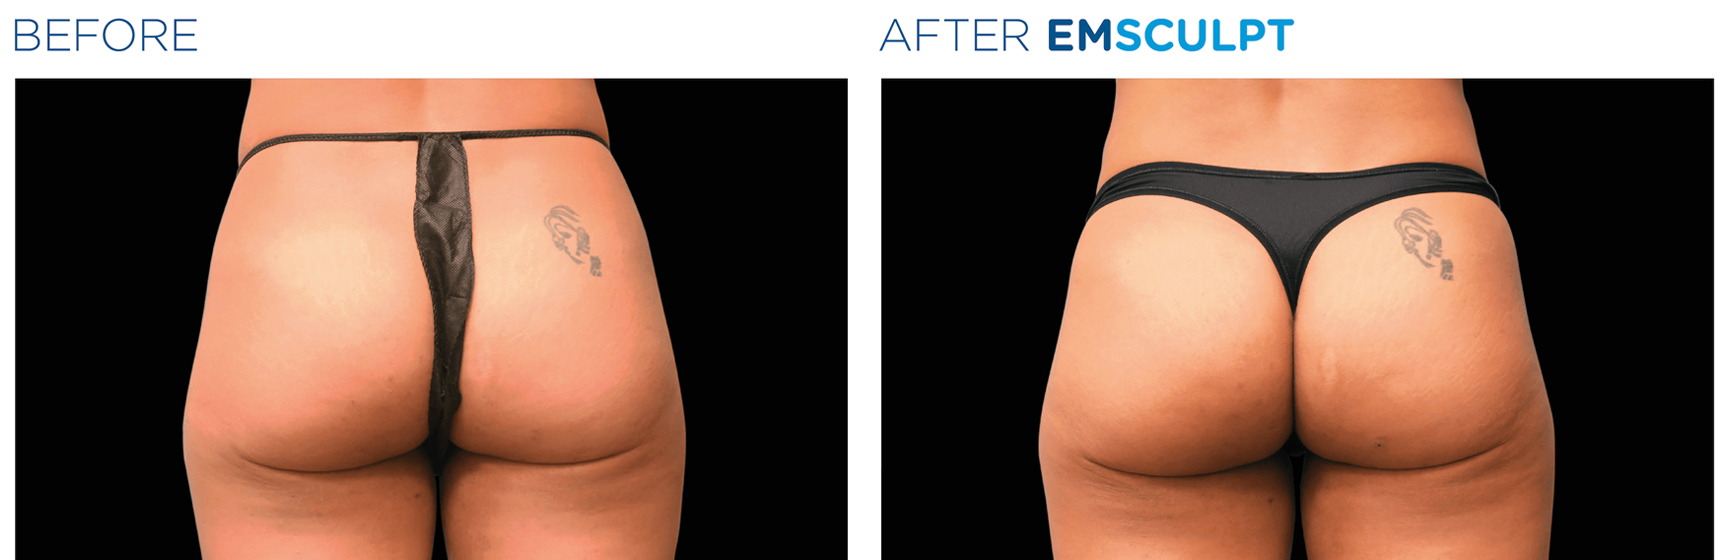 emsculpt before and after1